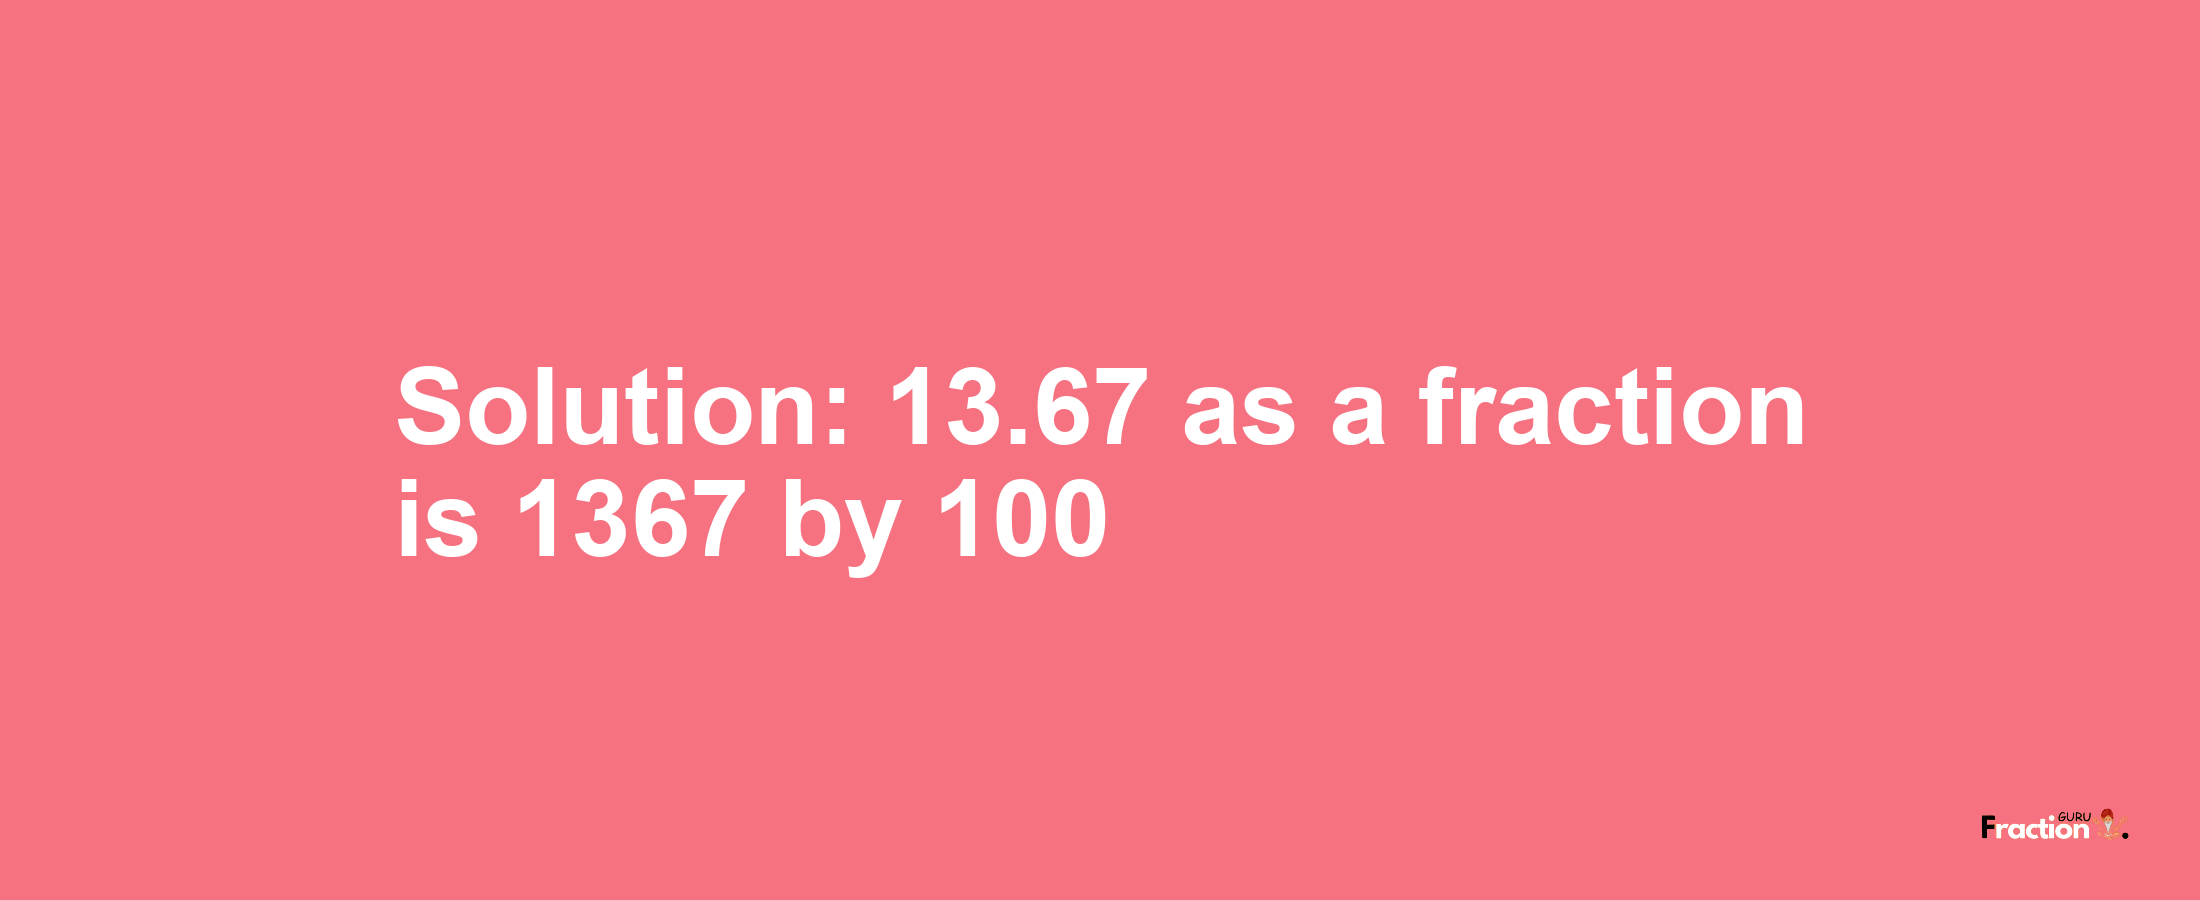 Solution:13.67 as a fraction is 1367/100